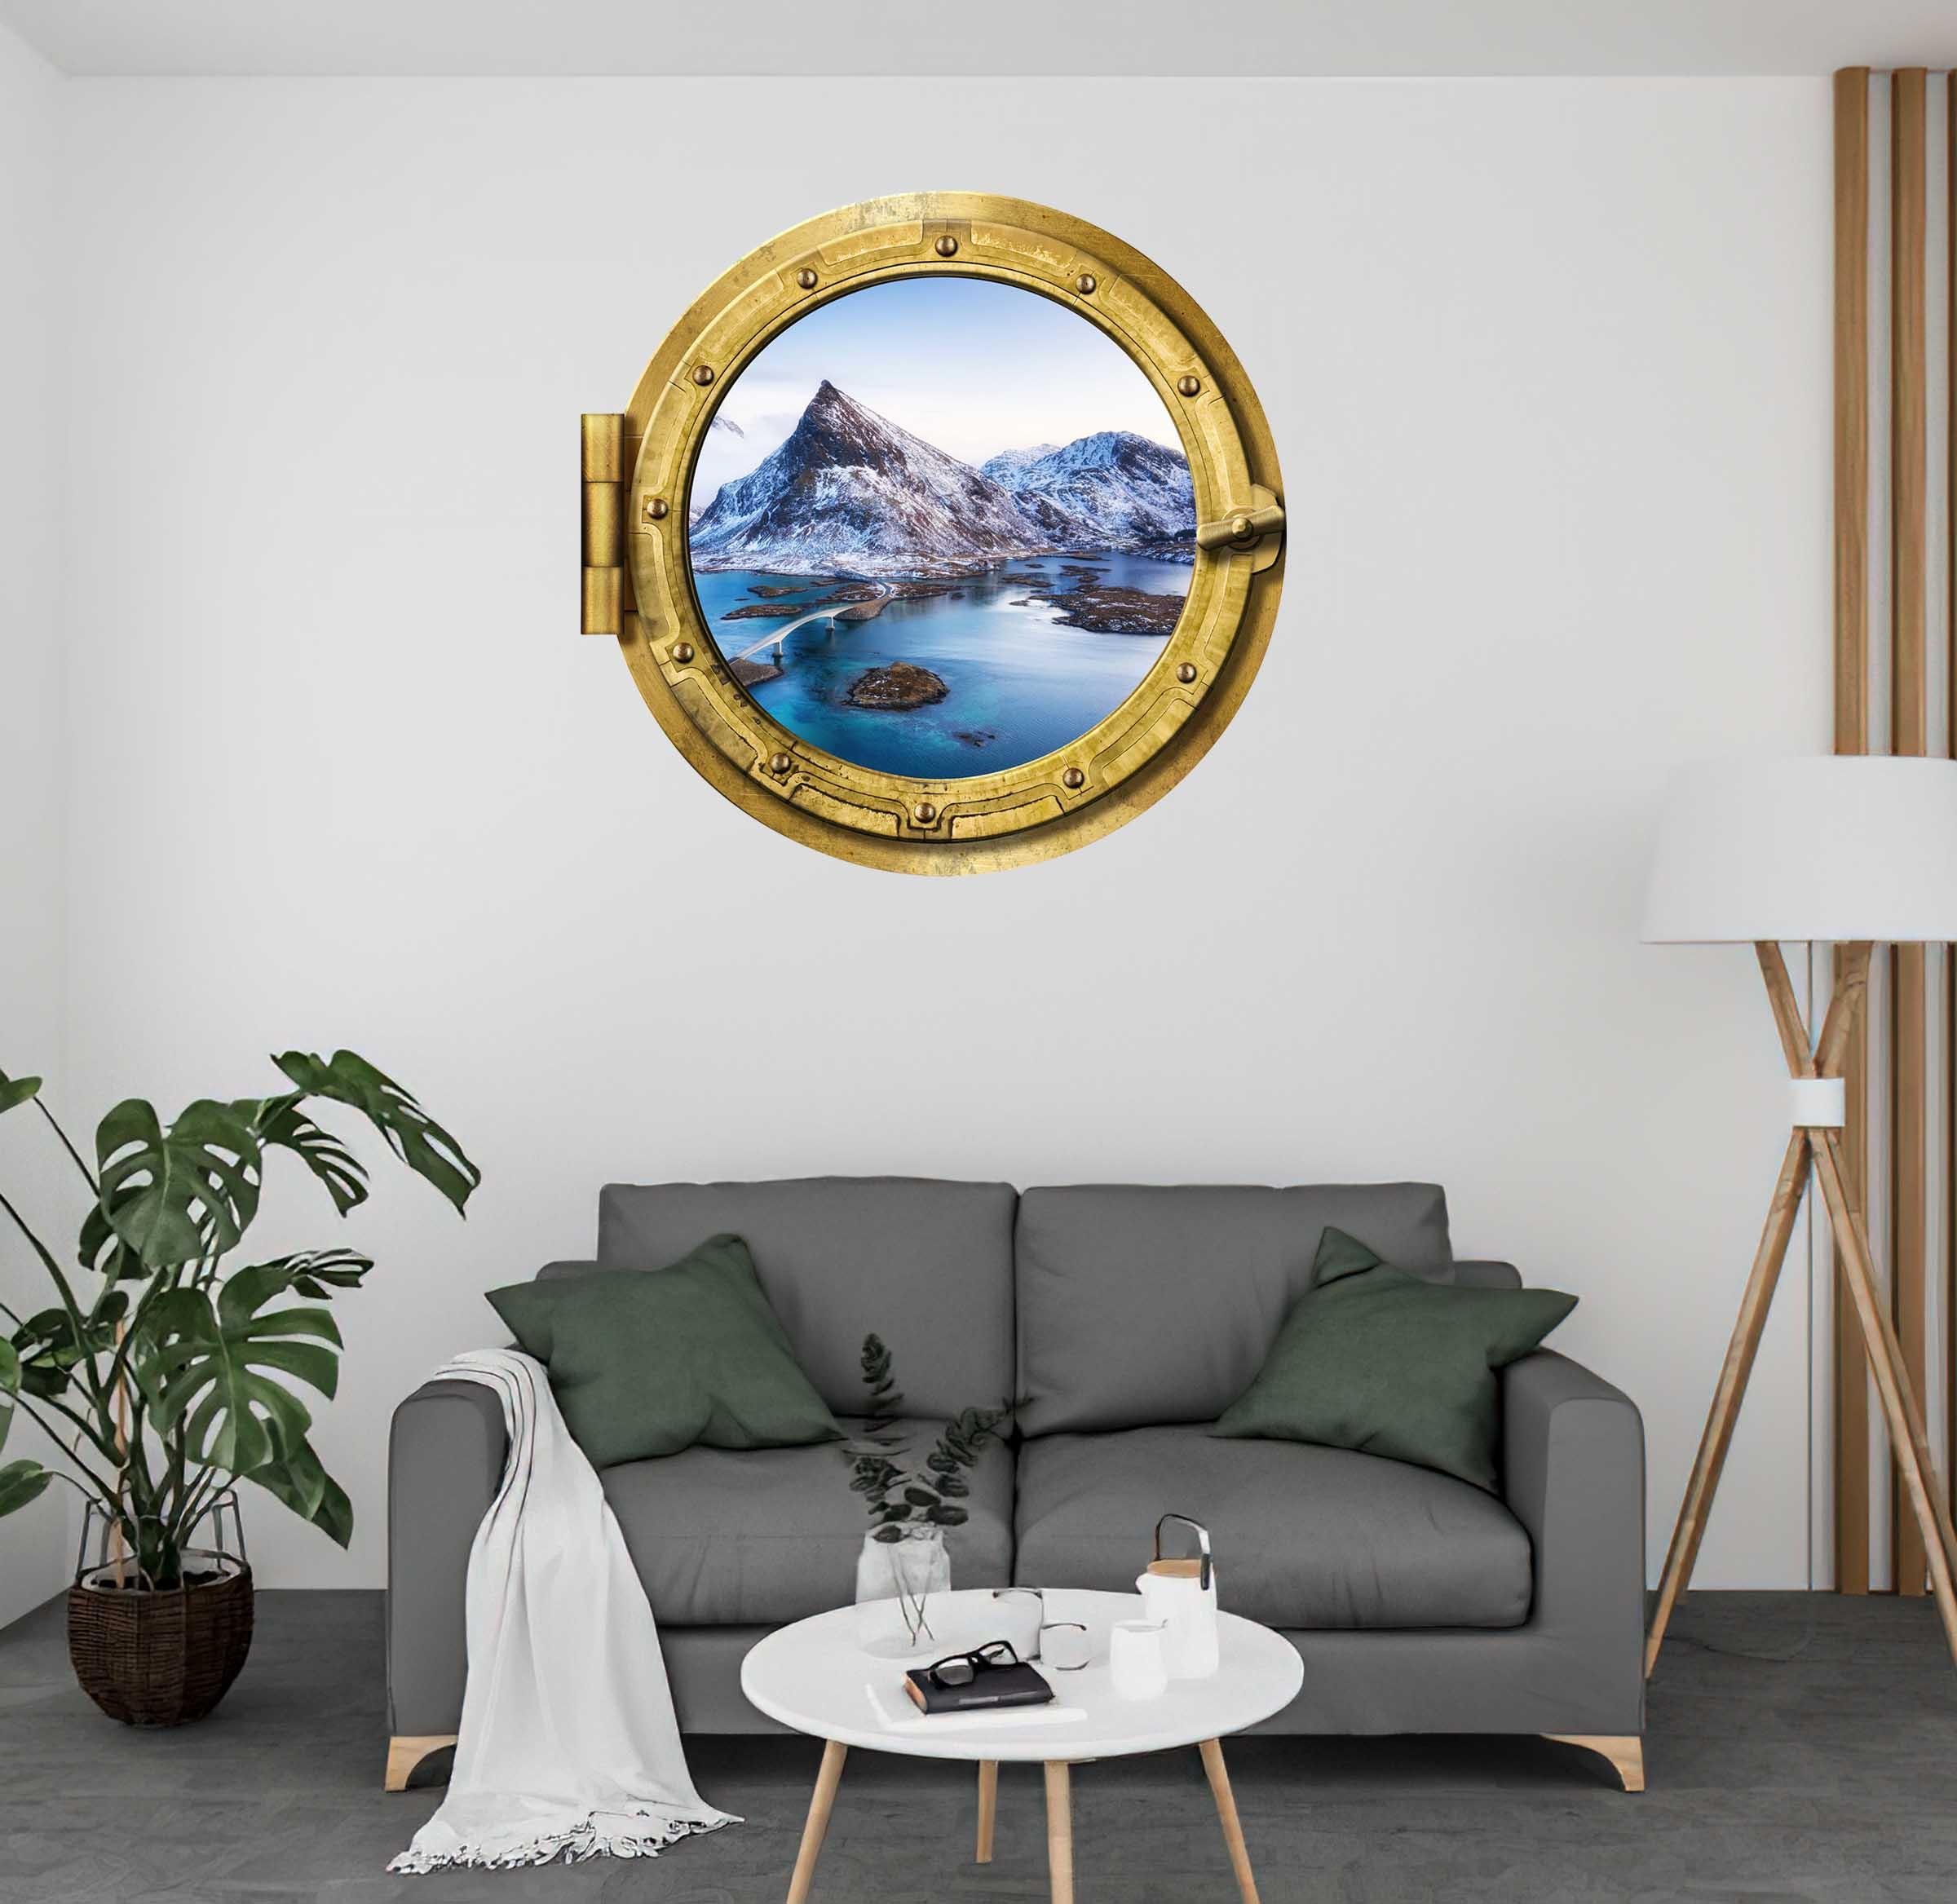 Mountains with Blue lake and a bridge Window #002, Removable wall decal